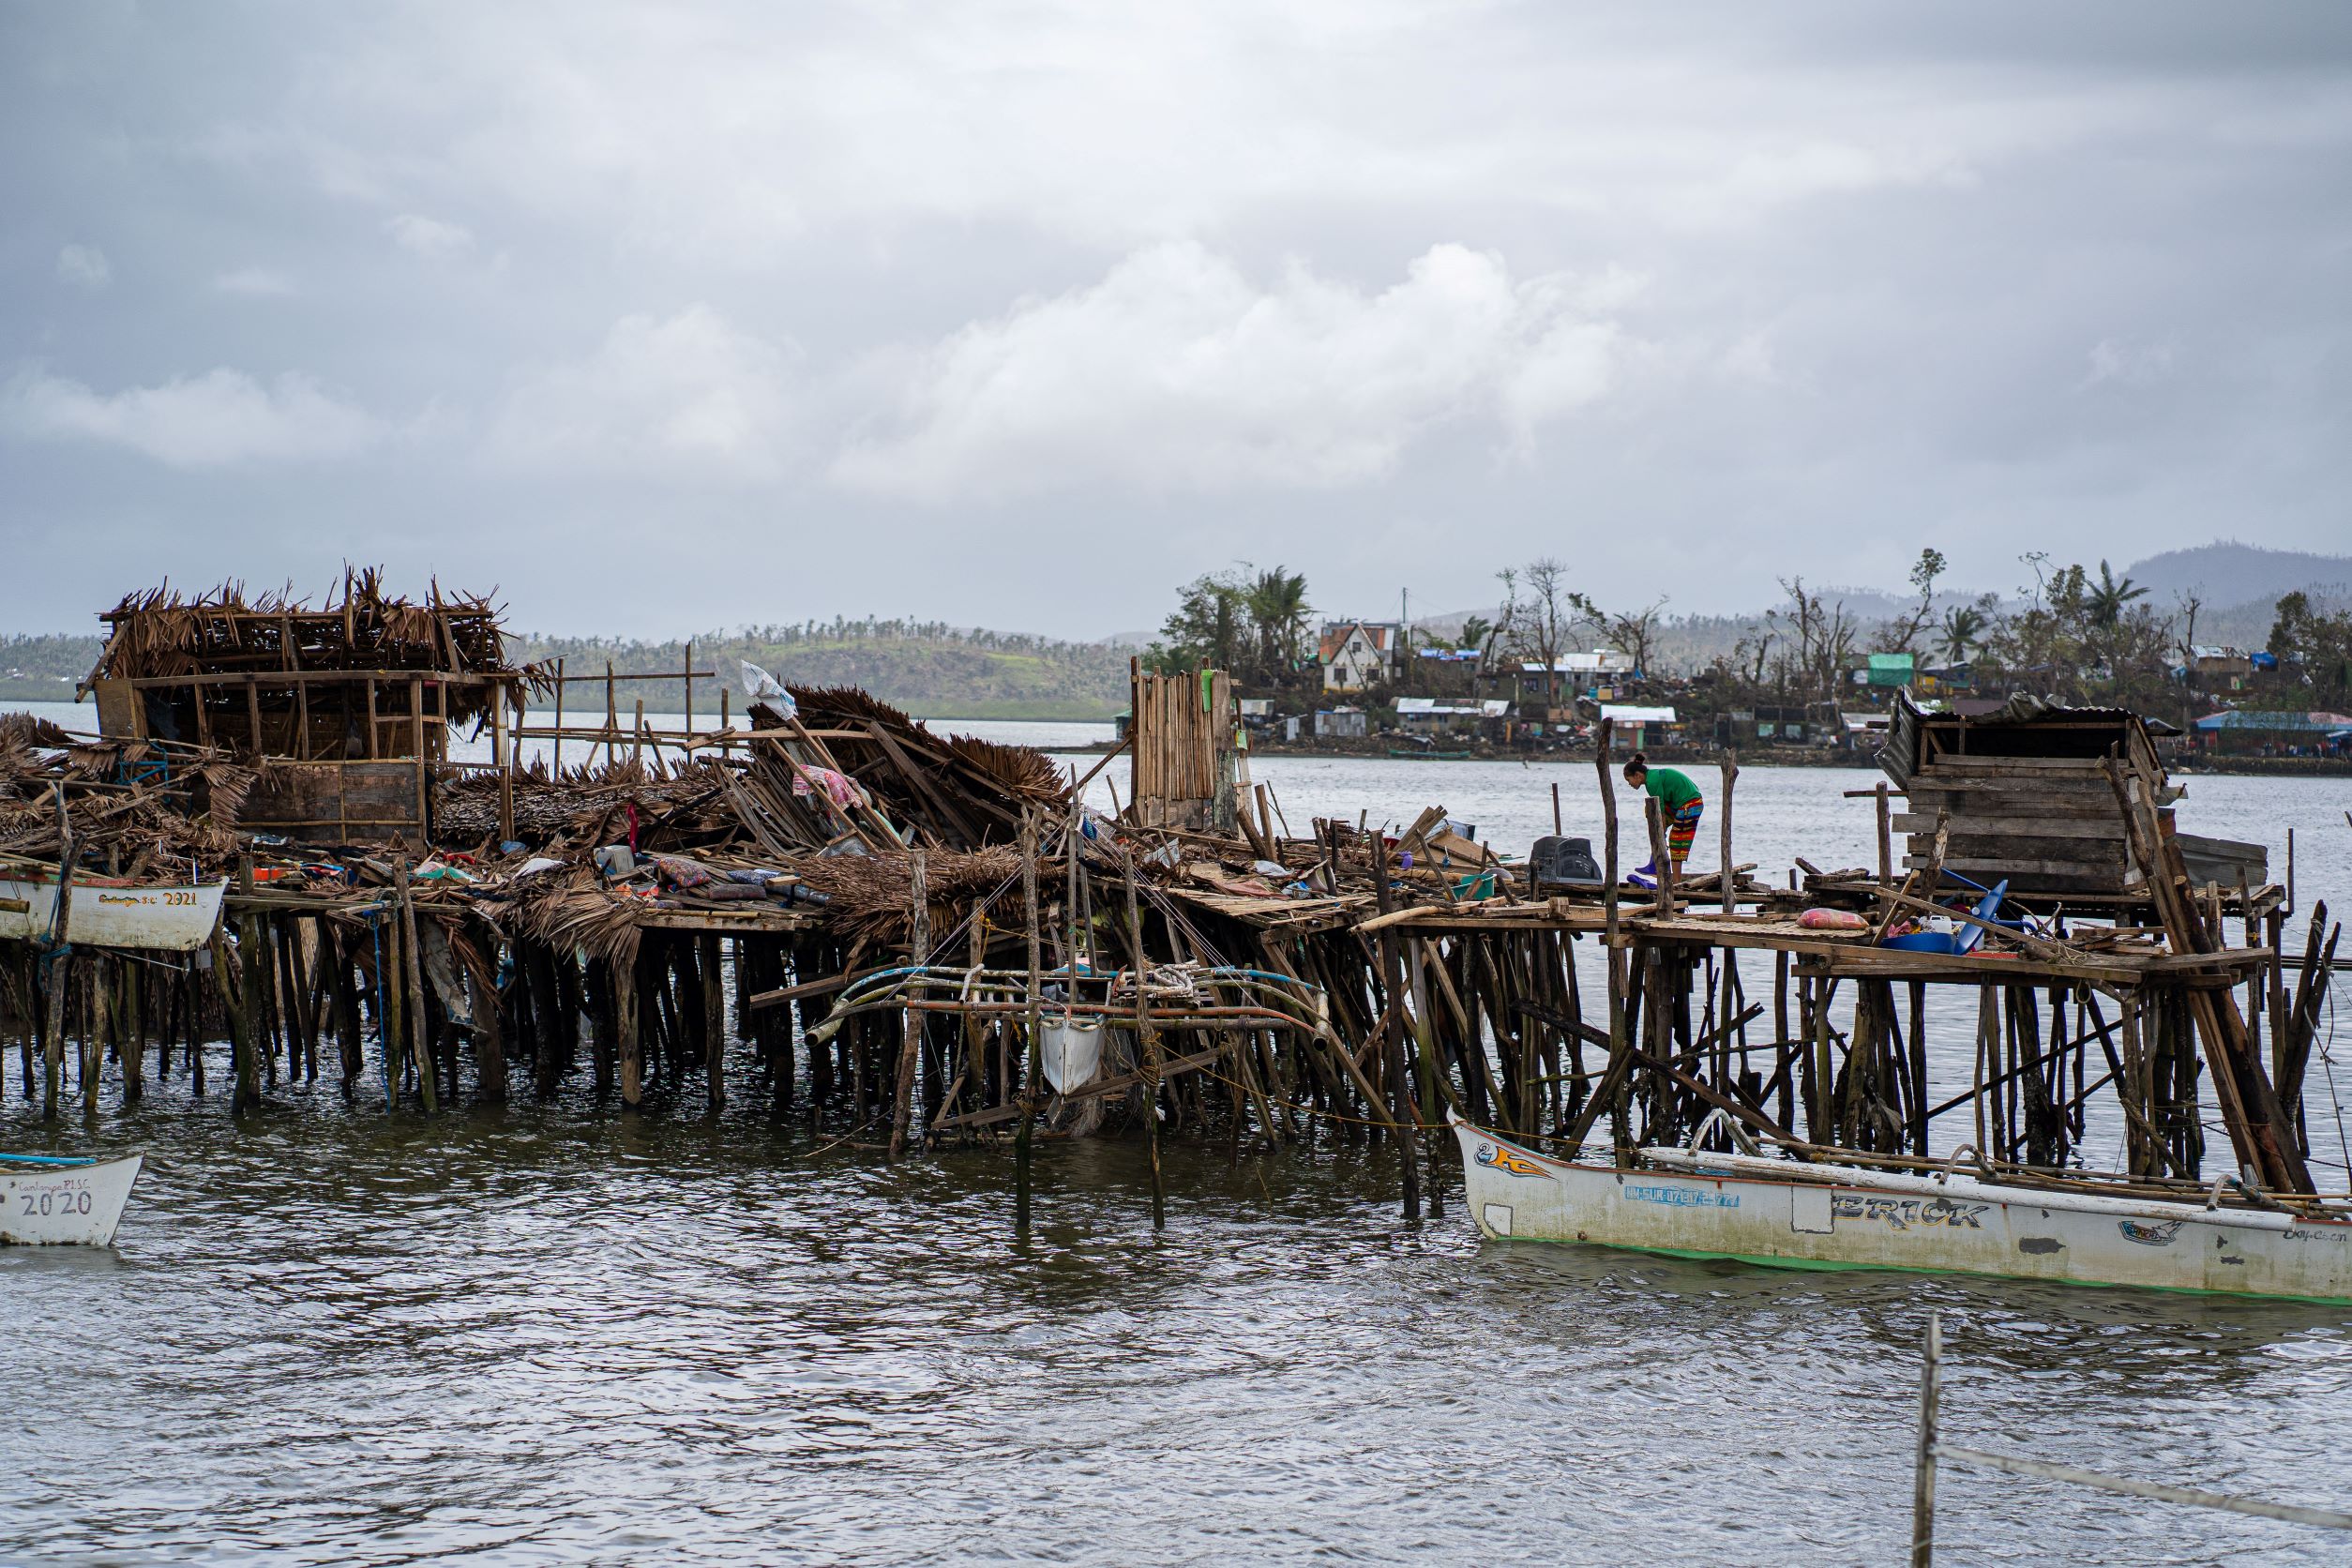 Out of the 92 houses in Surigao City’s Badjao community, only a few were left standing after Typhoon Odette. The families also lost 18 boats and their community school. ©UNICEF Philippines/2021/Louie Pacardo